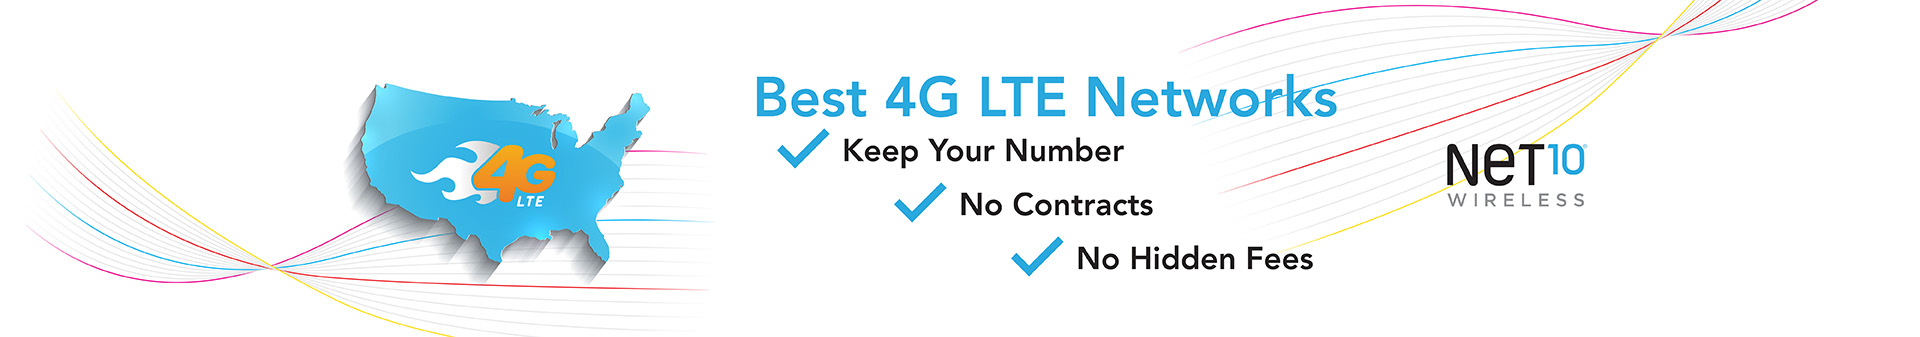 Best 4G LTE Networks